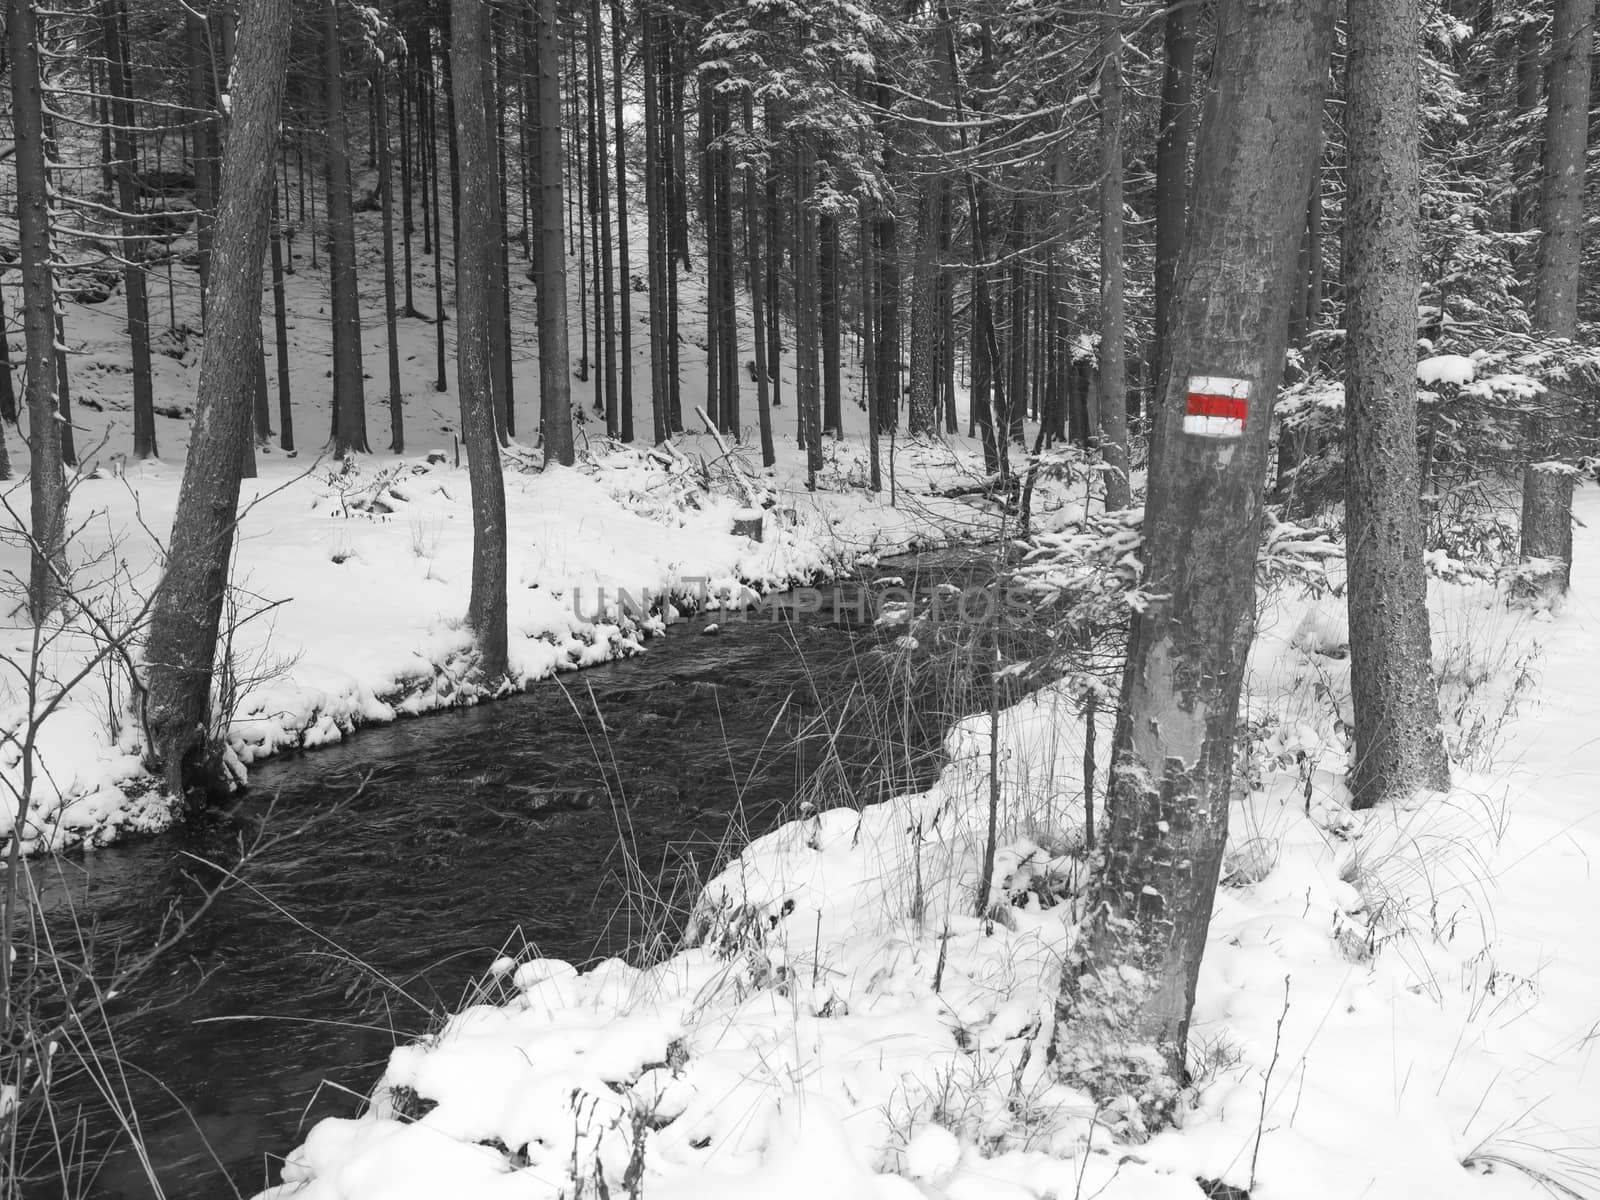 snow covered forest water stream creek with trees, branches and stones, idyllic winter landscape in black and white with red hiker sign.